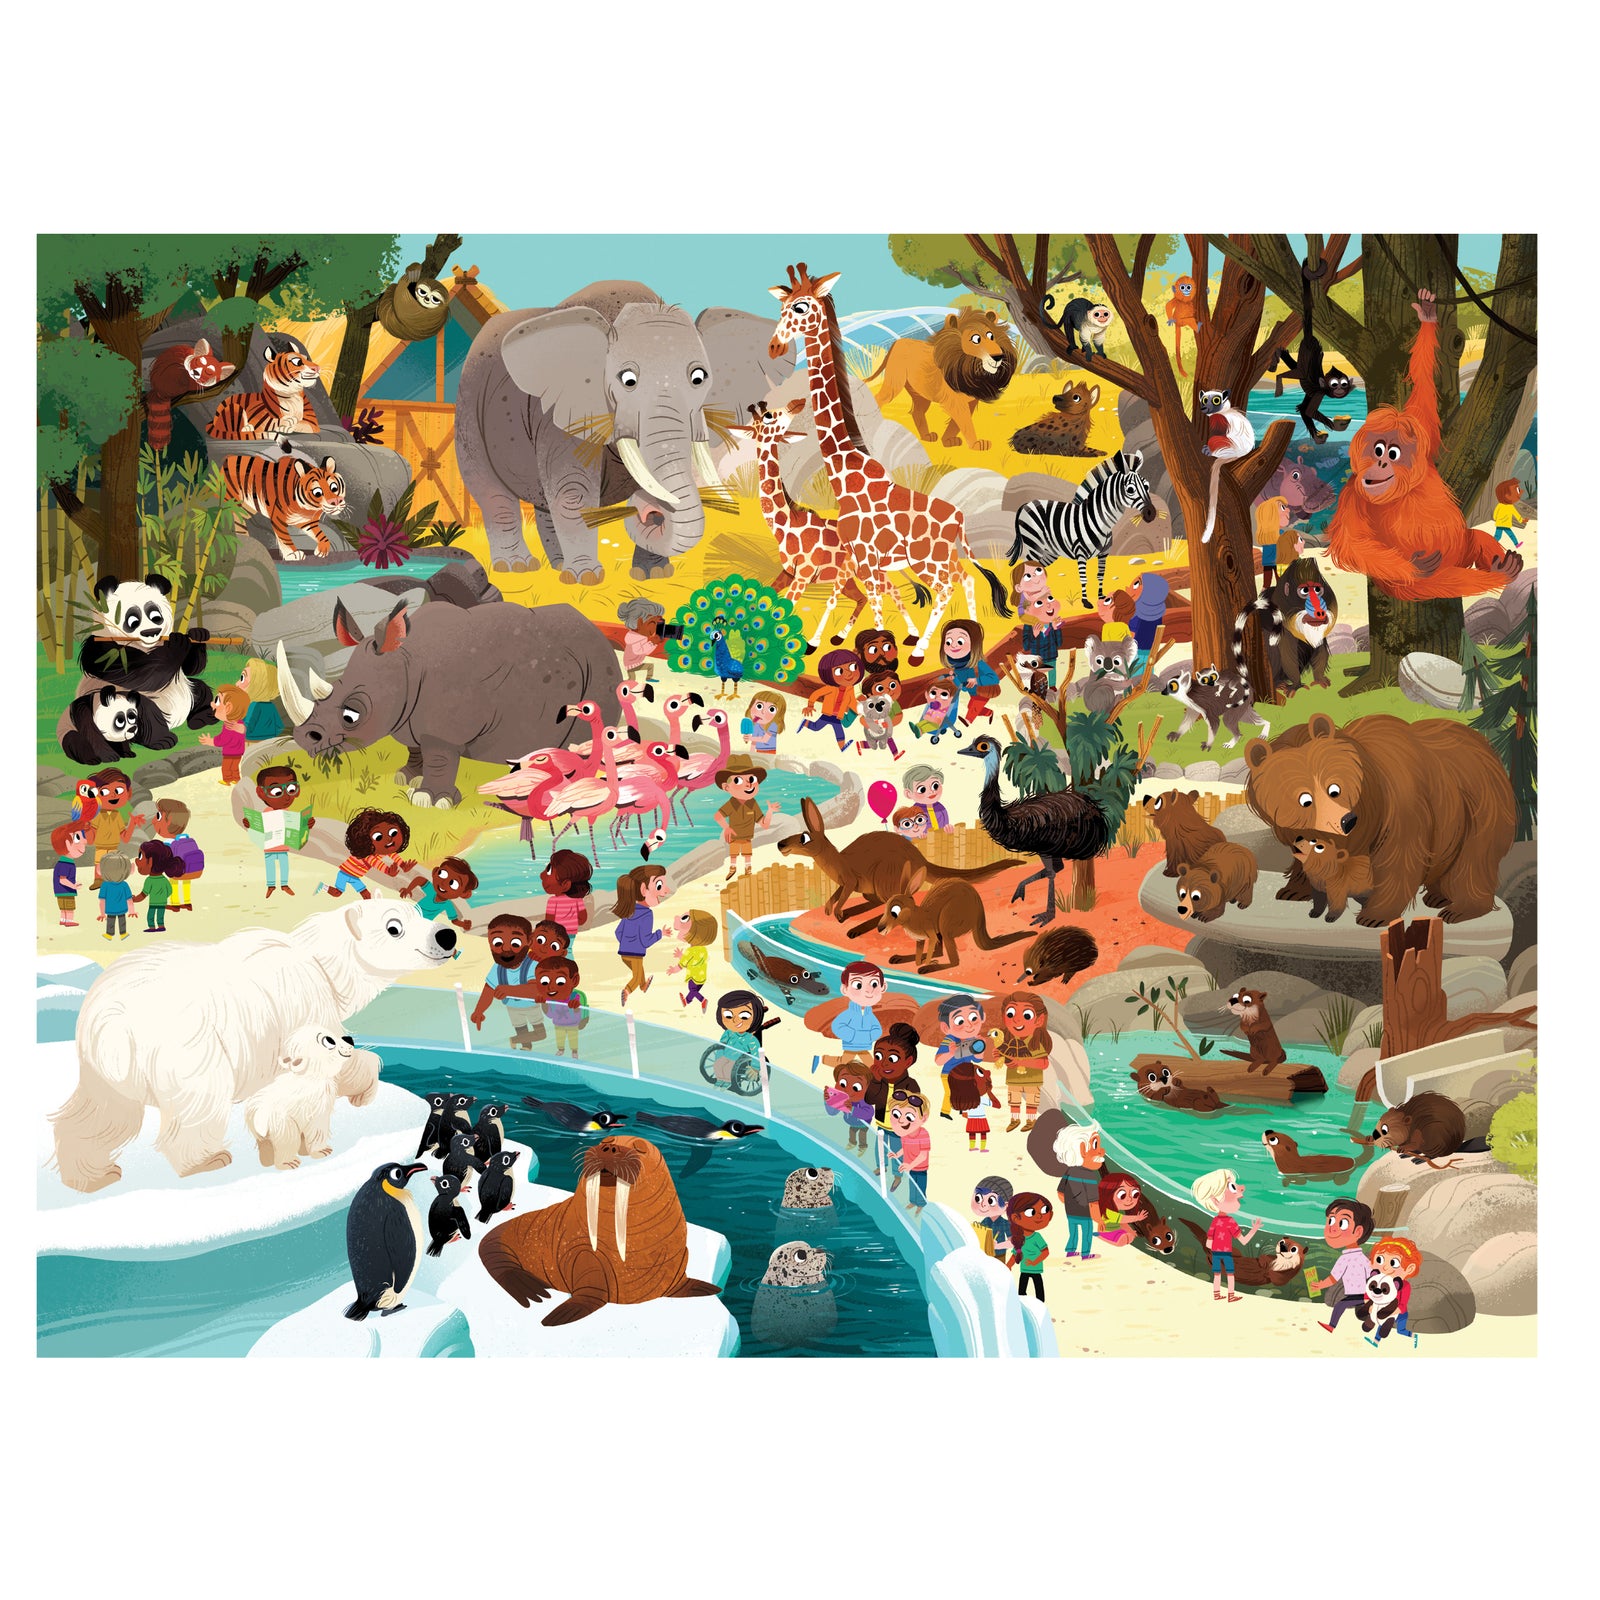 72-Piece Puzzle - Day at the Zoo